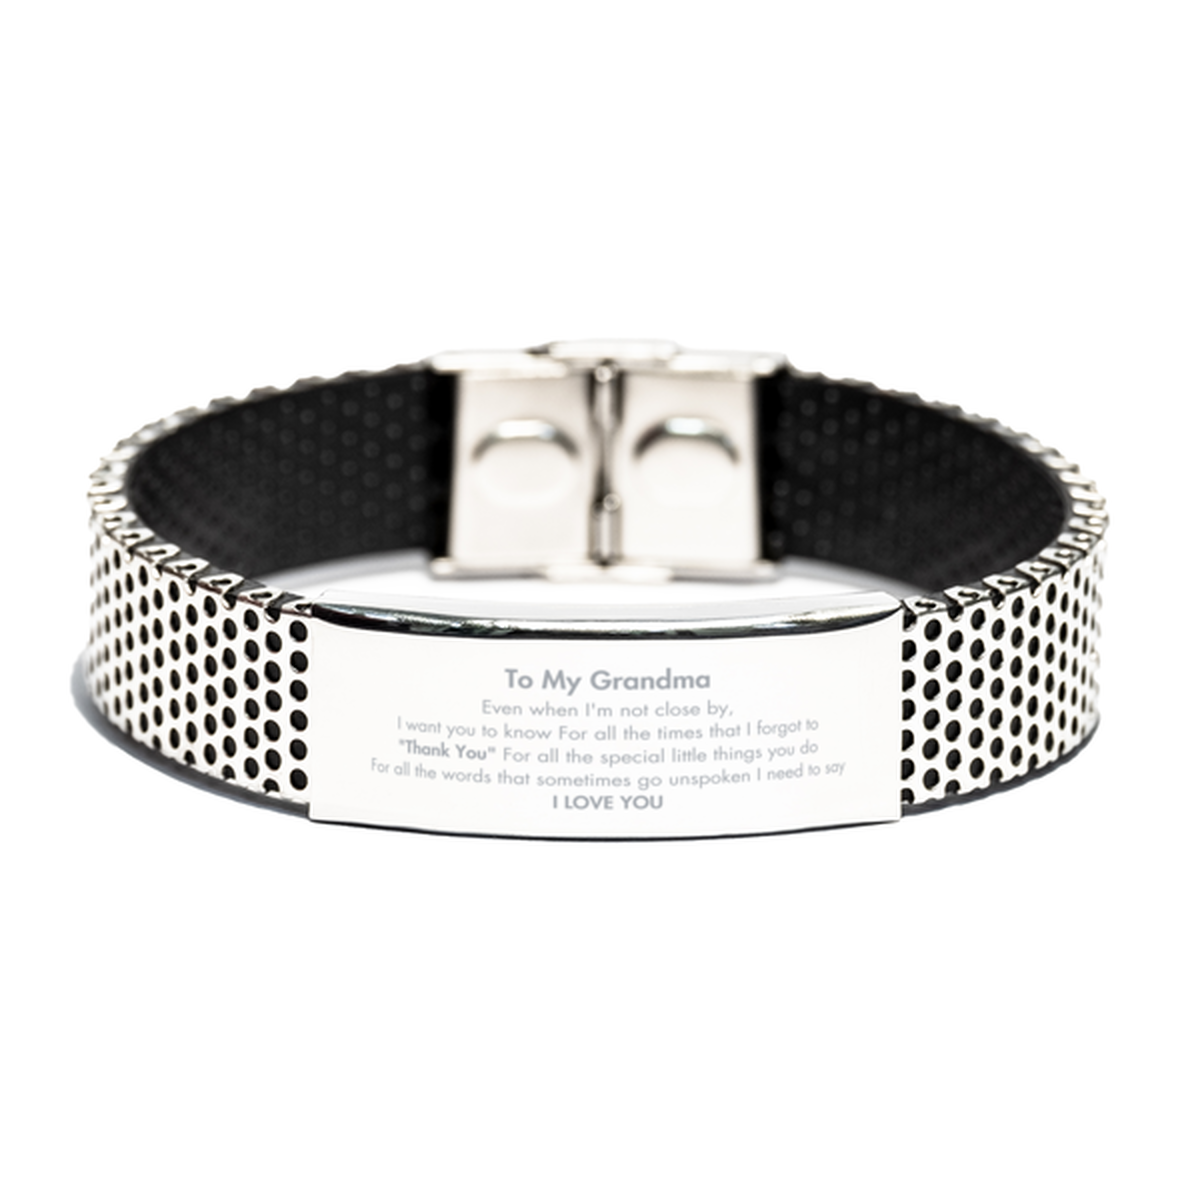 Thank You Gifts for Grandma, Keepsake Stainless Steel Bracelet Gifts for Grandma Birthday Mother's day Father's Day Grandma For all the words That sometimes go unspoken I need to say I LOVE YOU